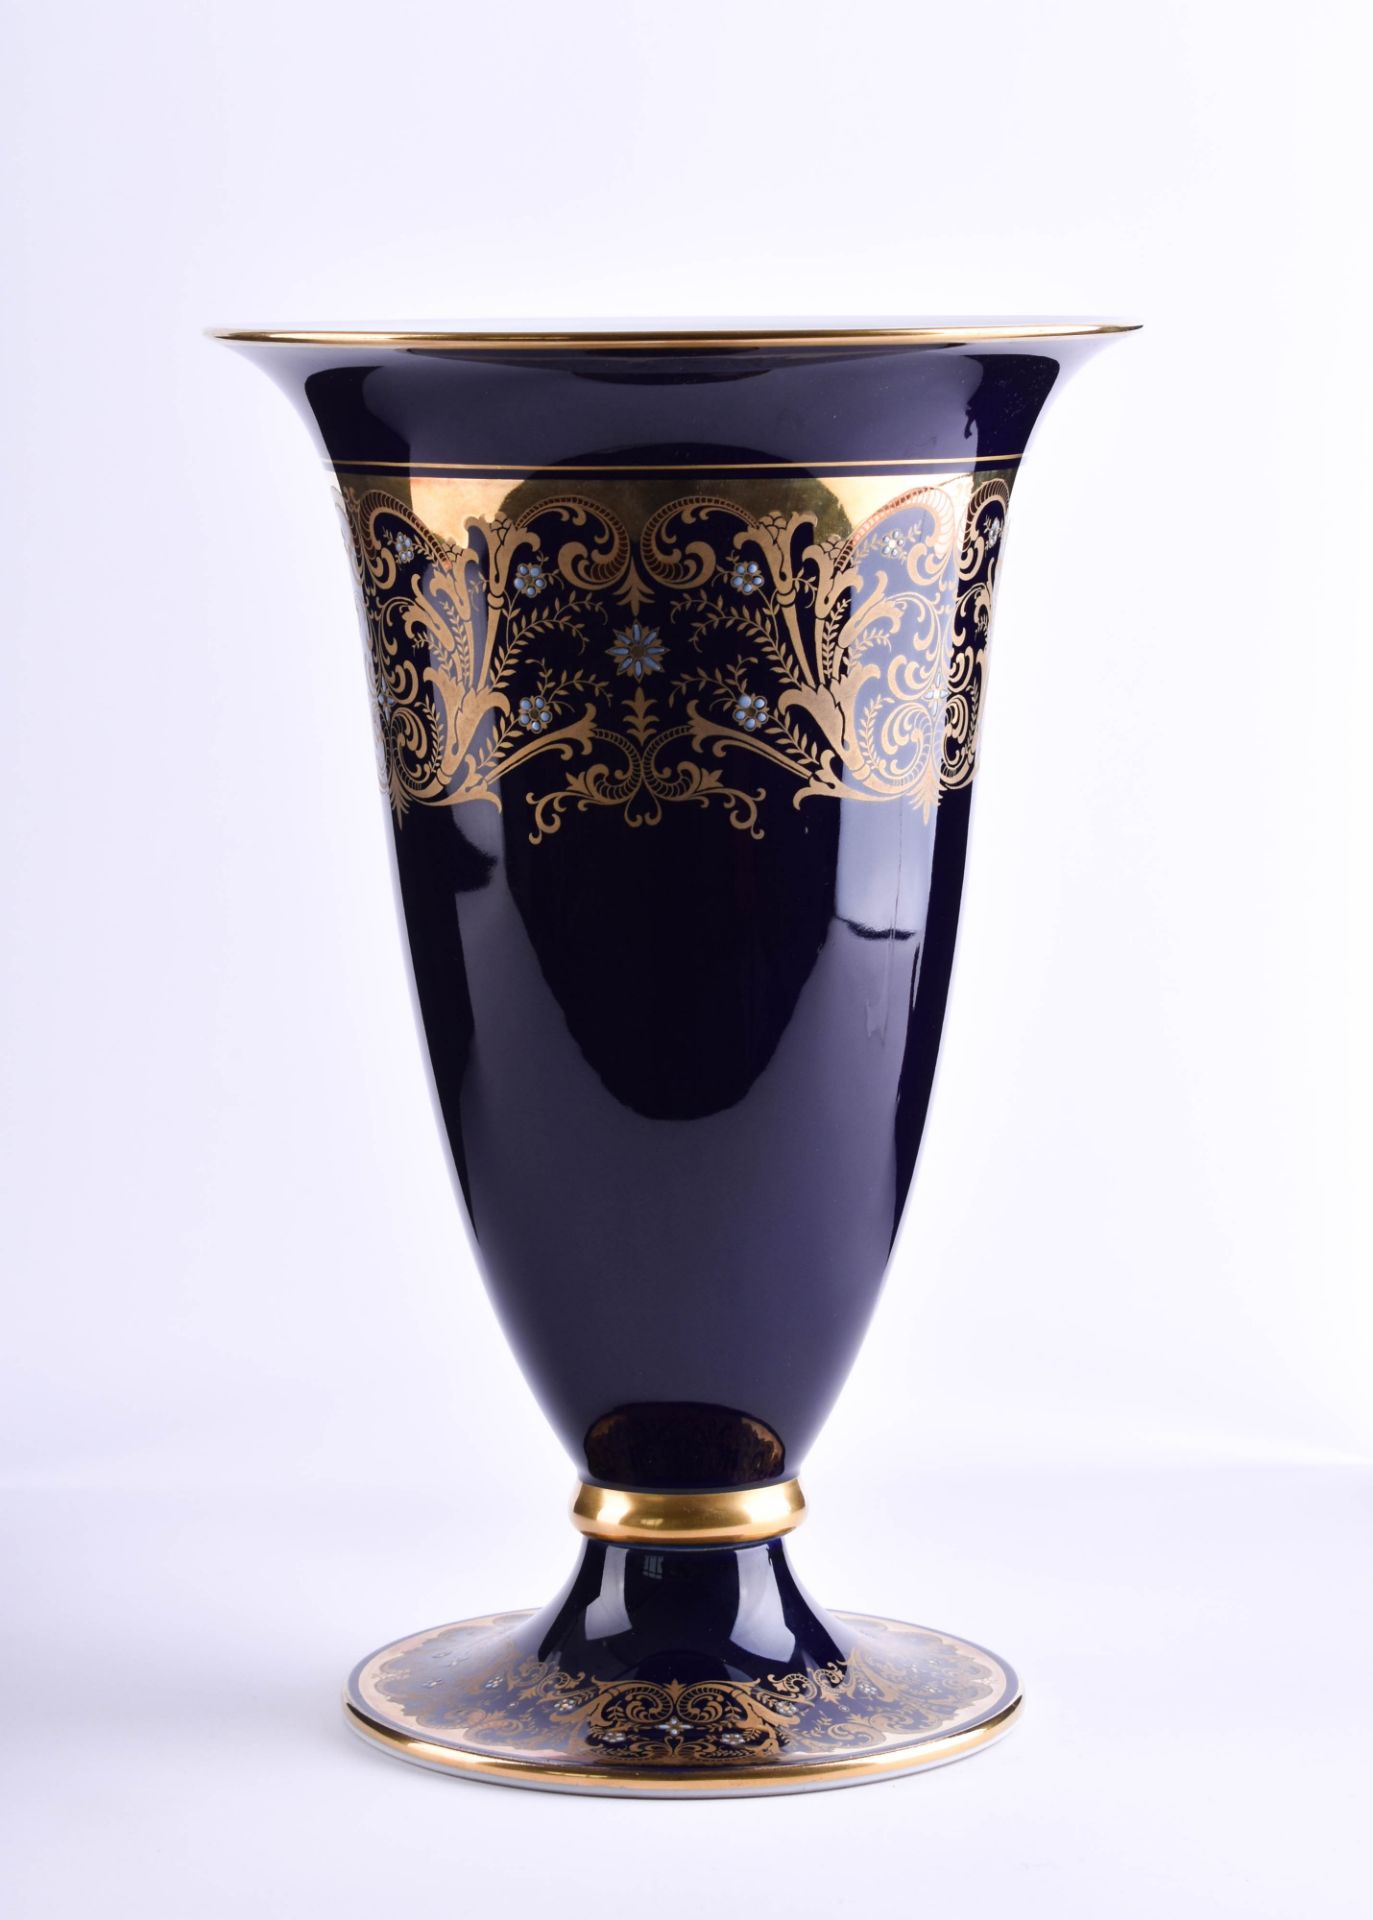 Rosenthal vase from the 30s / 40s